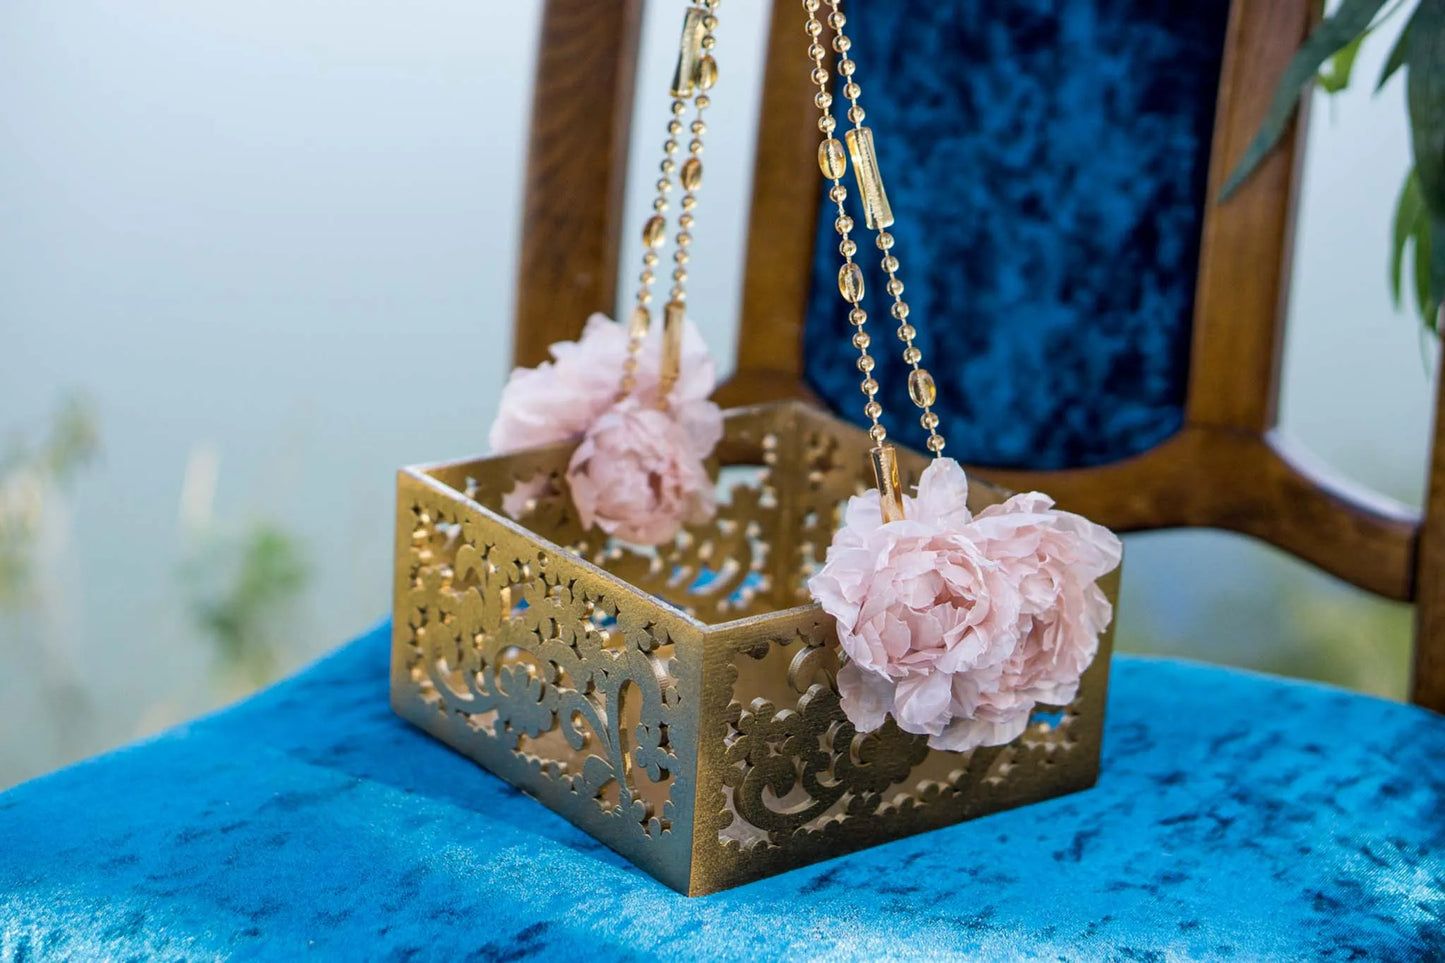 Decorative Gold Basket with Handmade Flowers